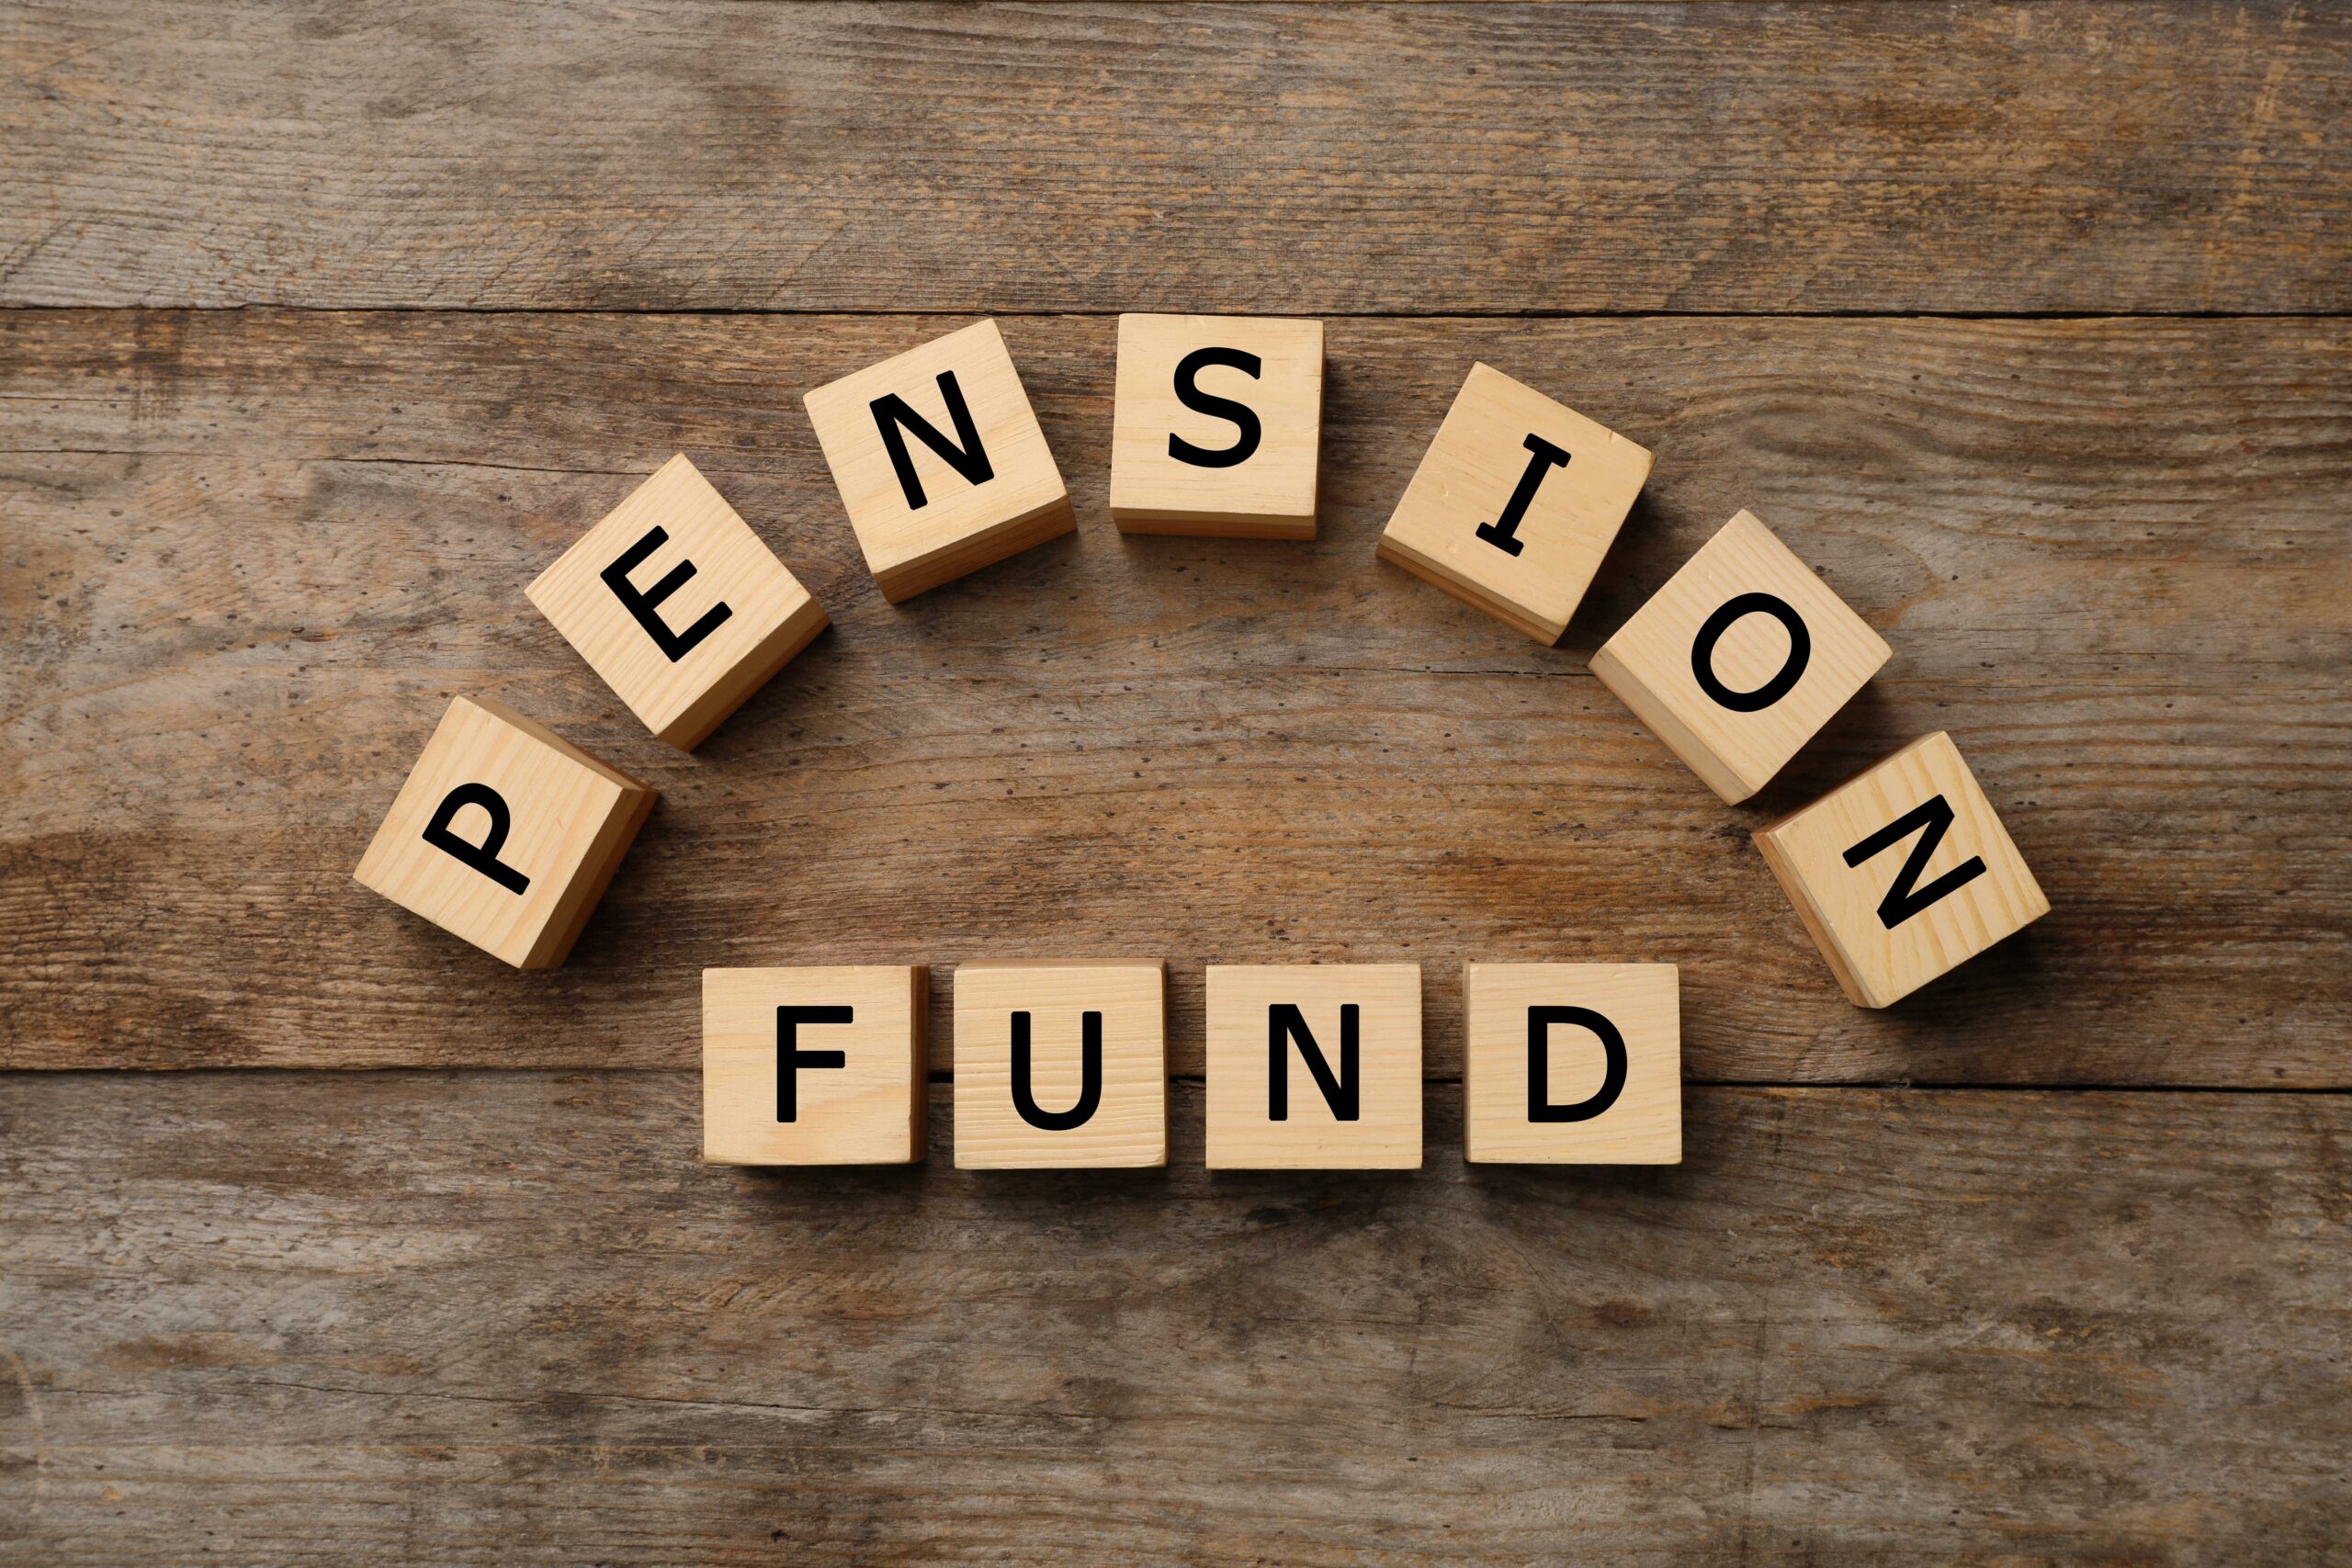 The case for increasing pension contributions